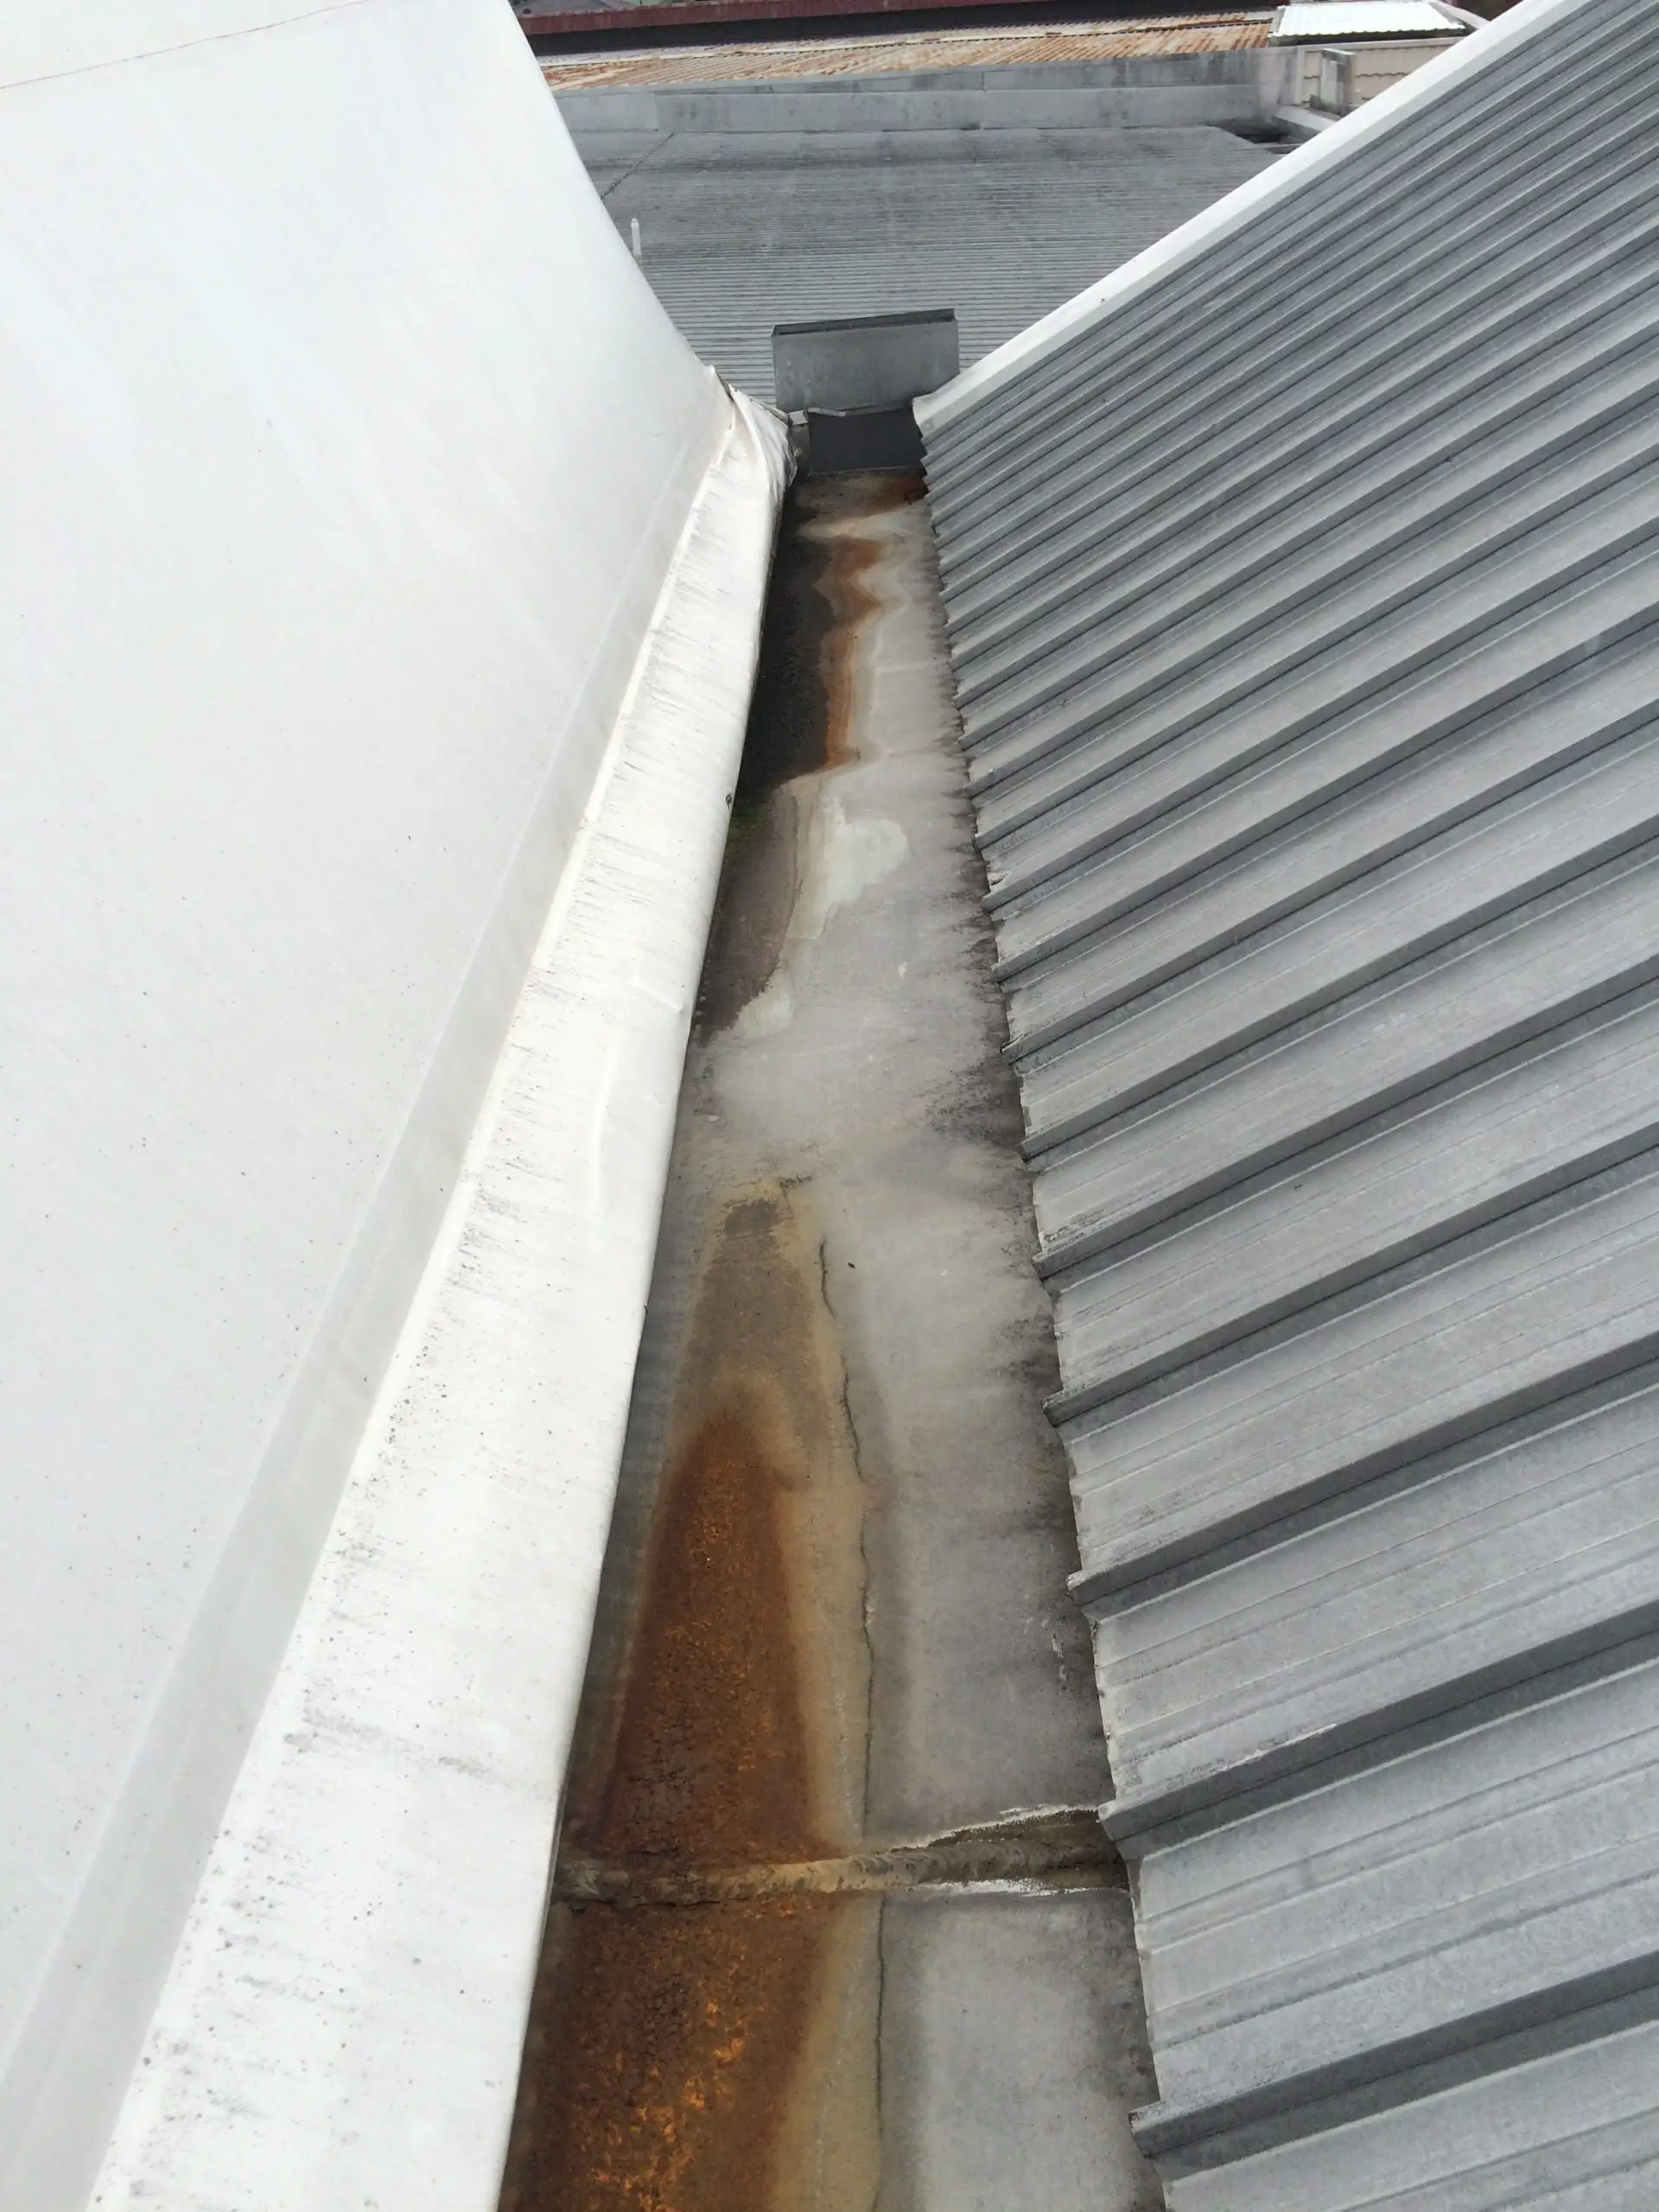 " Why is my roof leaking?"  10 POSSIBLE CAUSES OF A LEAKY ROOF